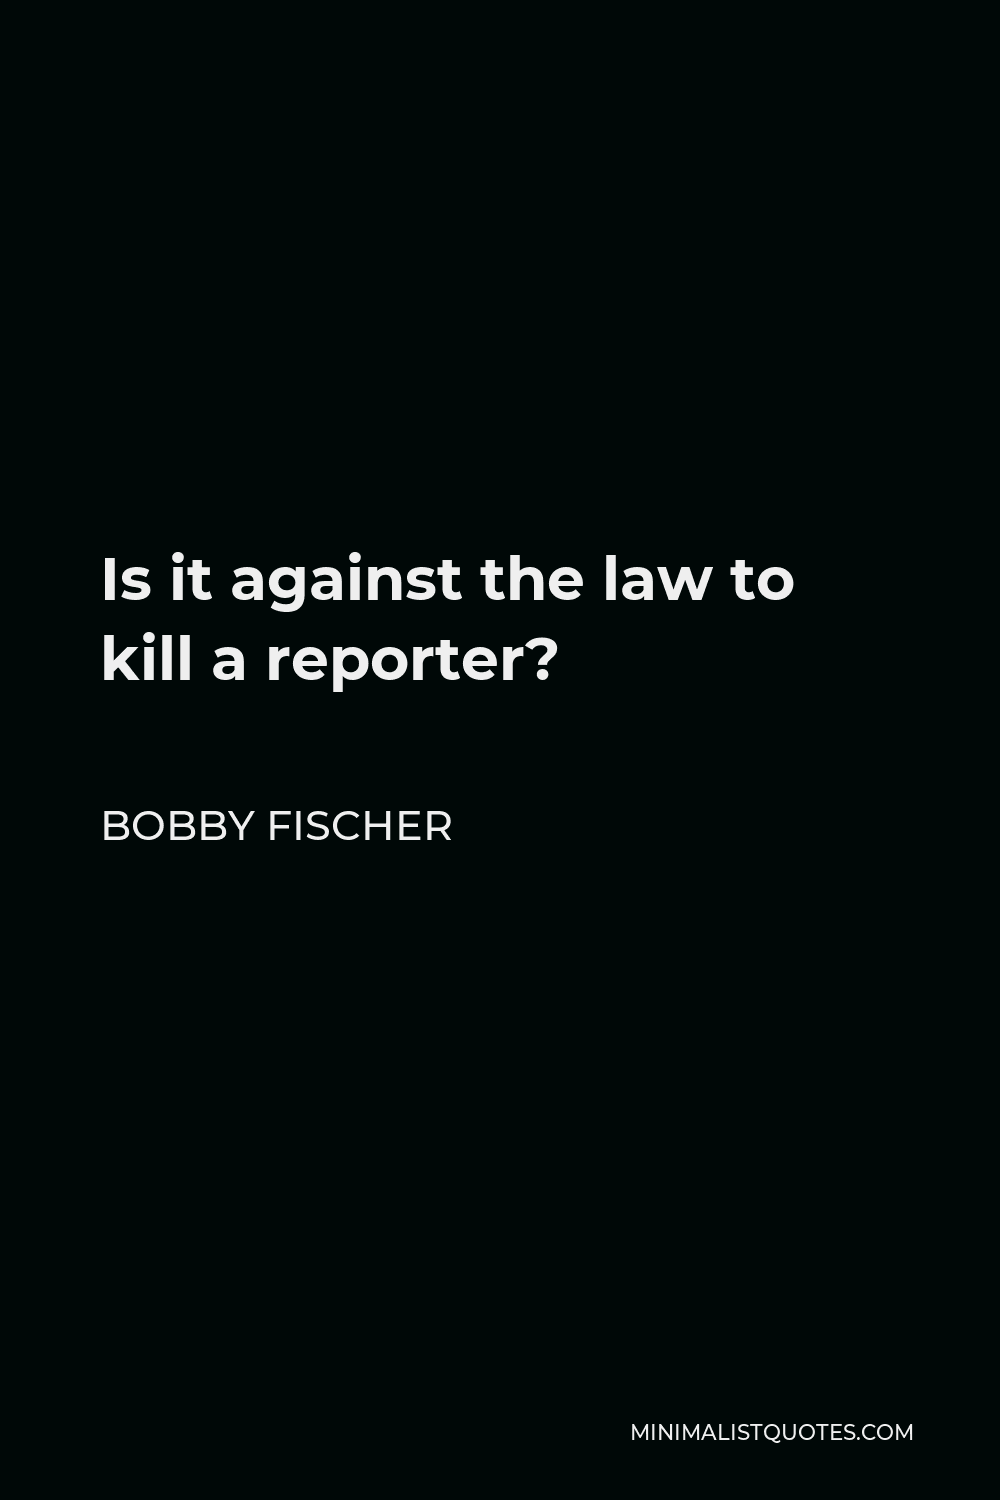 Bobby Fischer Quote - Is it against the law to kill a reporter?